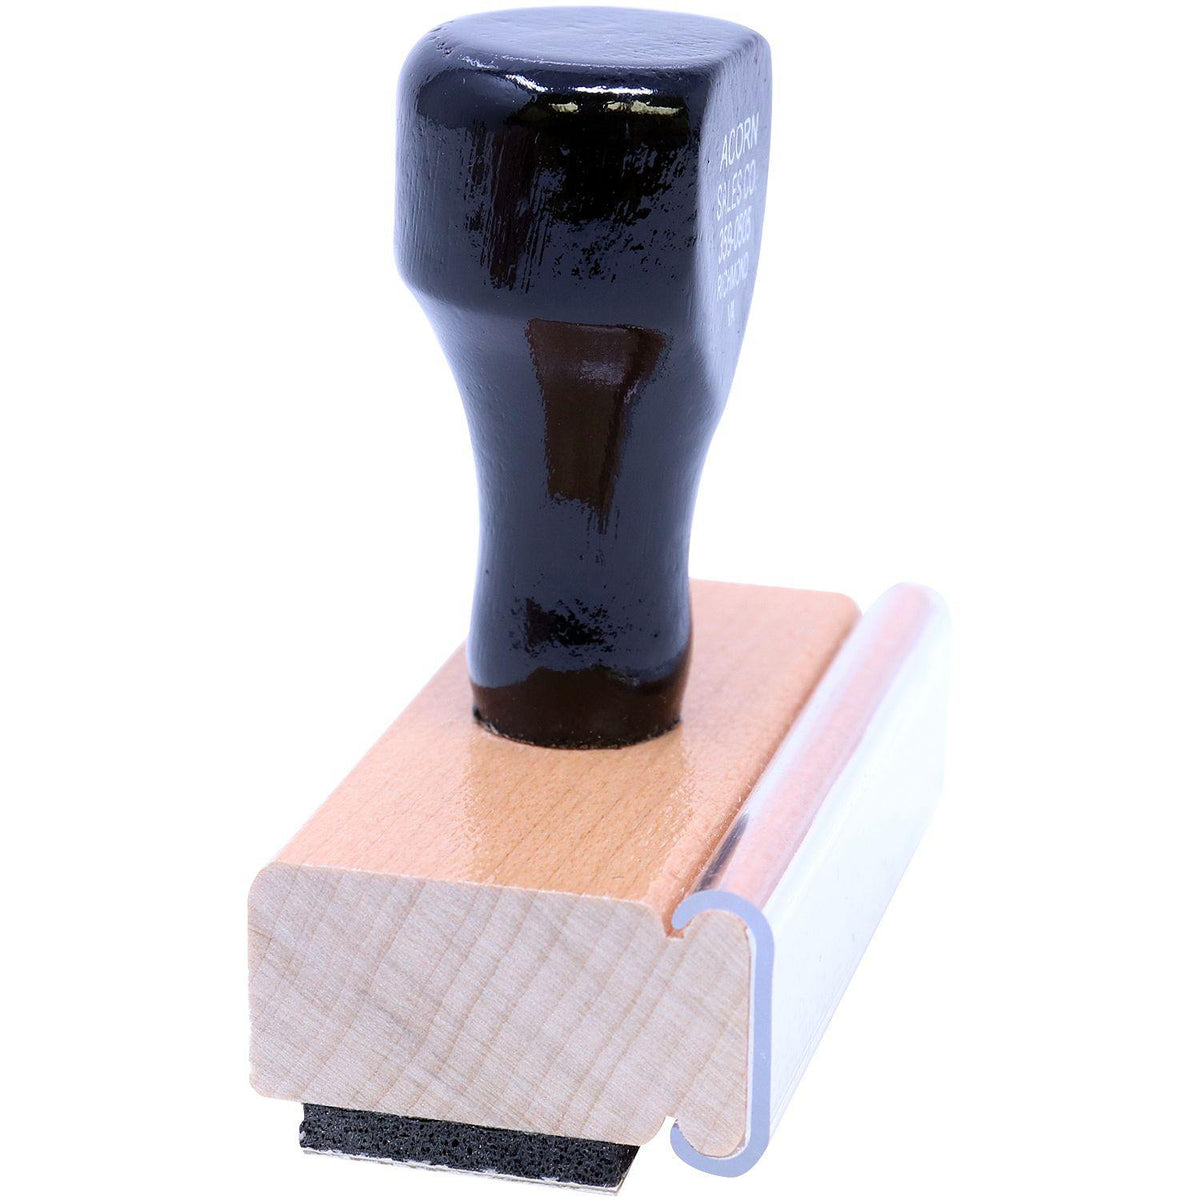 Side View of Large Outline Completed Rubber Stamp at an Angle